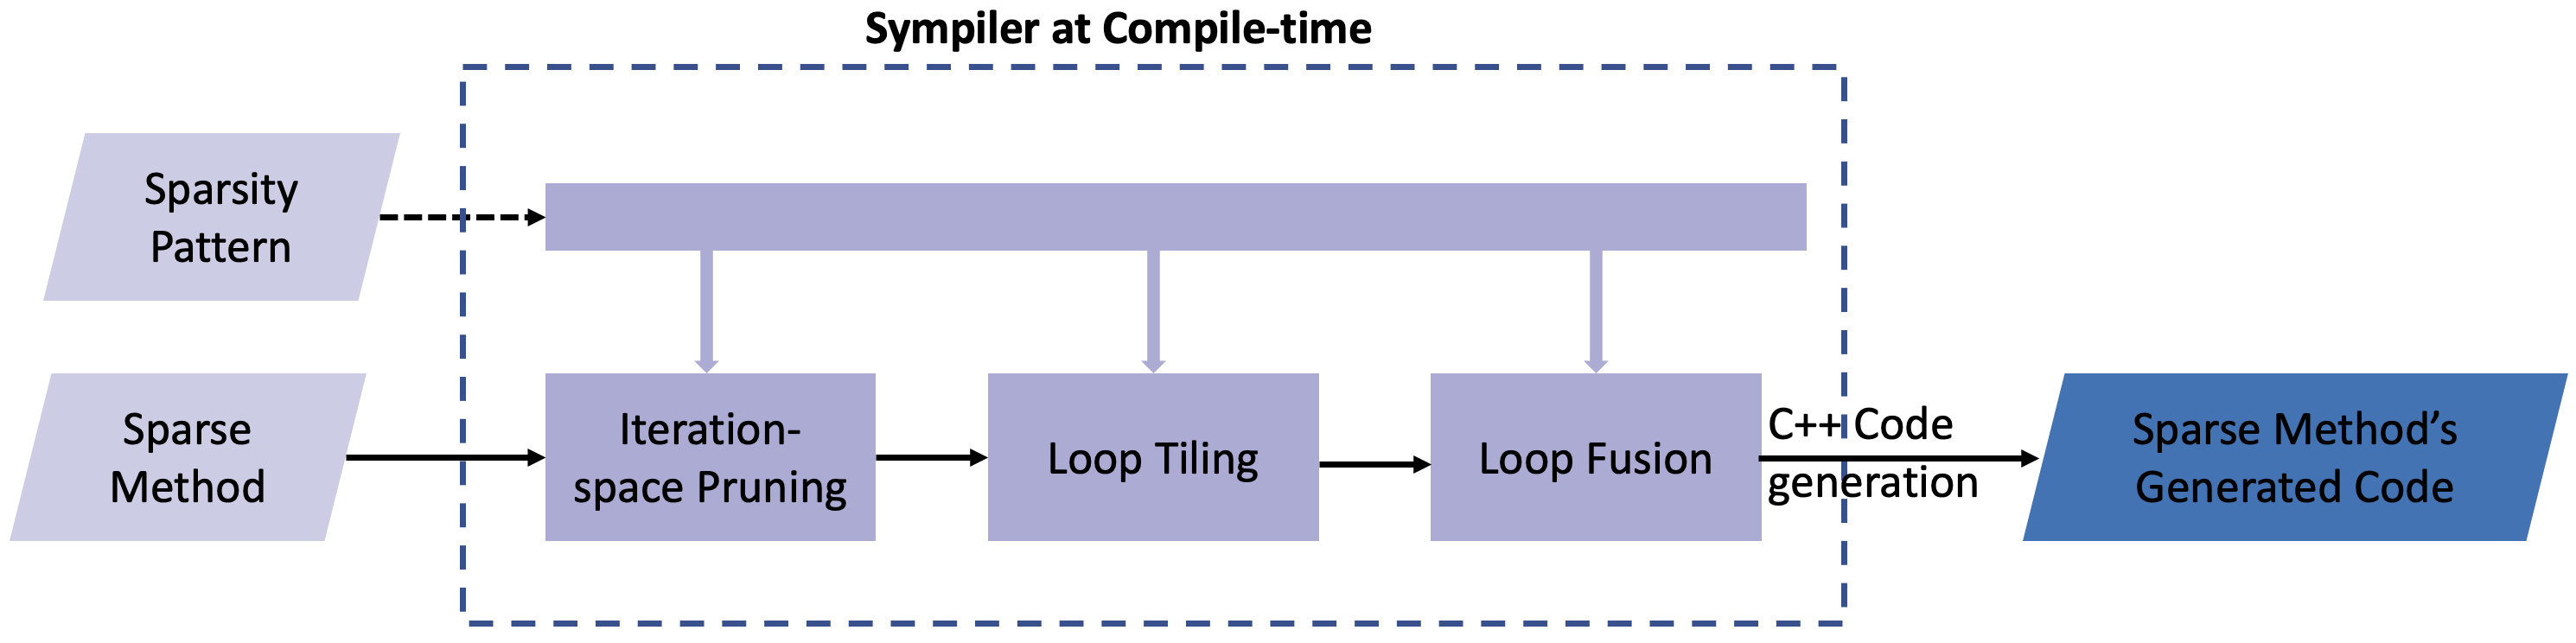 Sympiler Compile-time